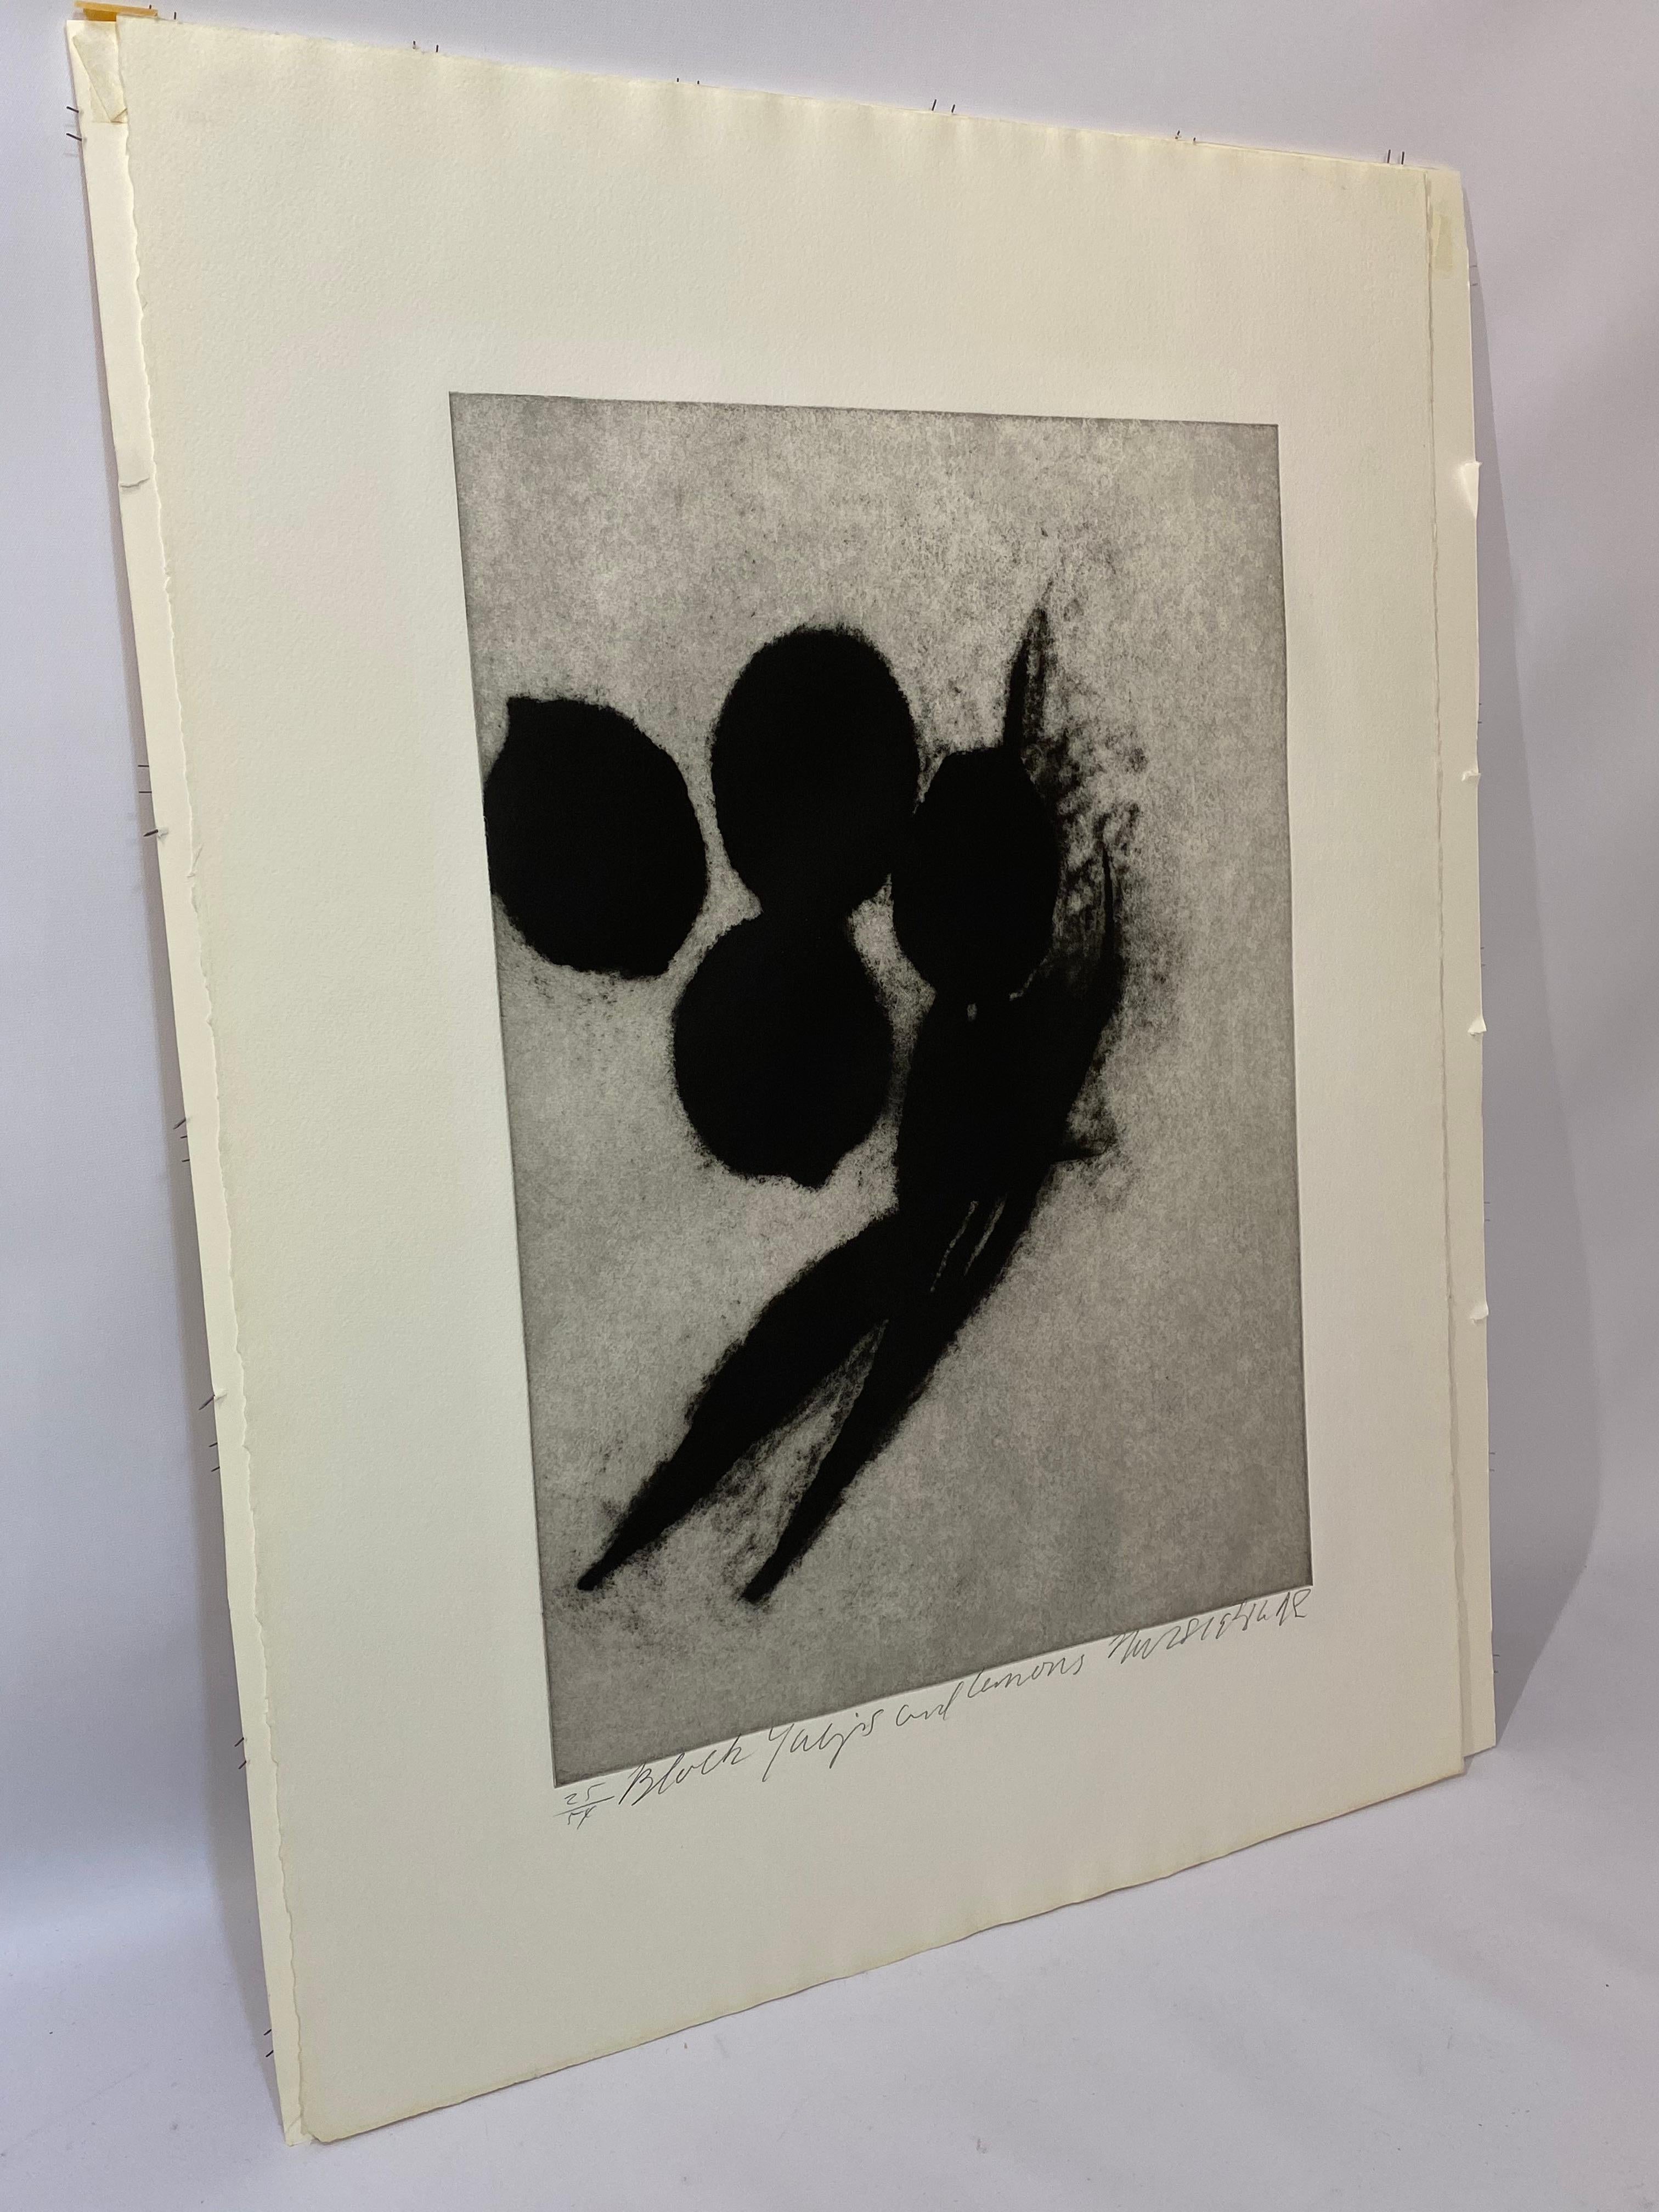 Etching and aquatint entitled Black Tulips and Lemons by Donald Sultan, circa 1986. Edition 25/54. Signed and titled in pencil. Very good, strong image.

Wiki:

As a printmaker, his Scope of work includes lithography, serigraphy, wood cut,